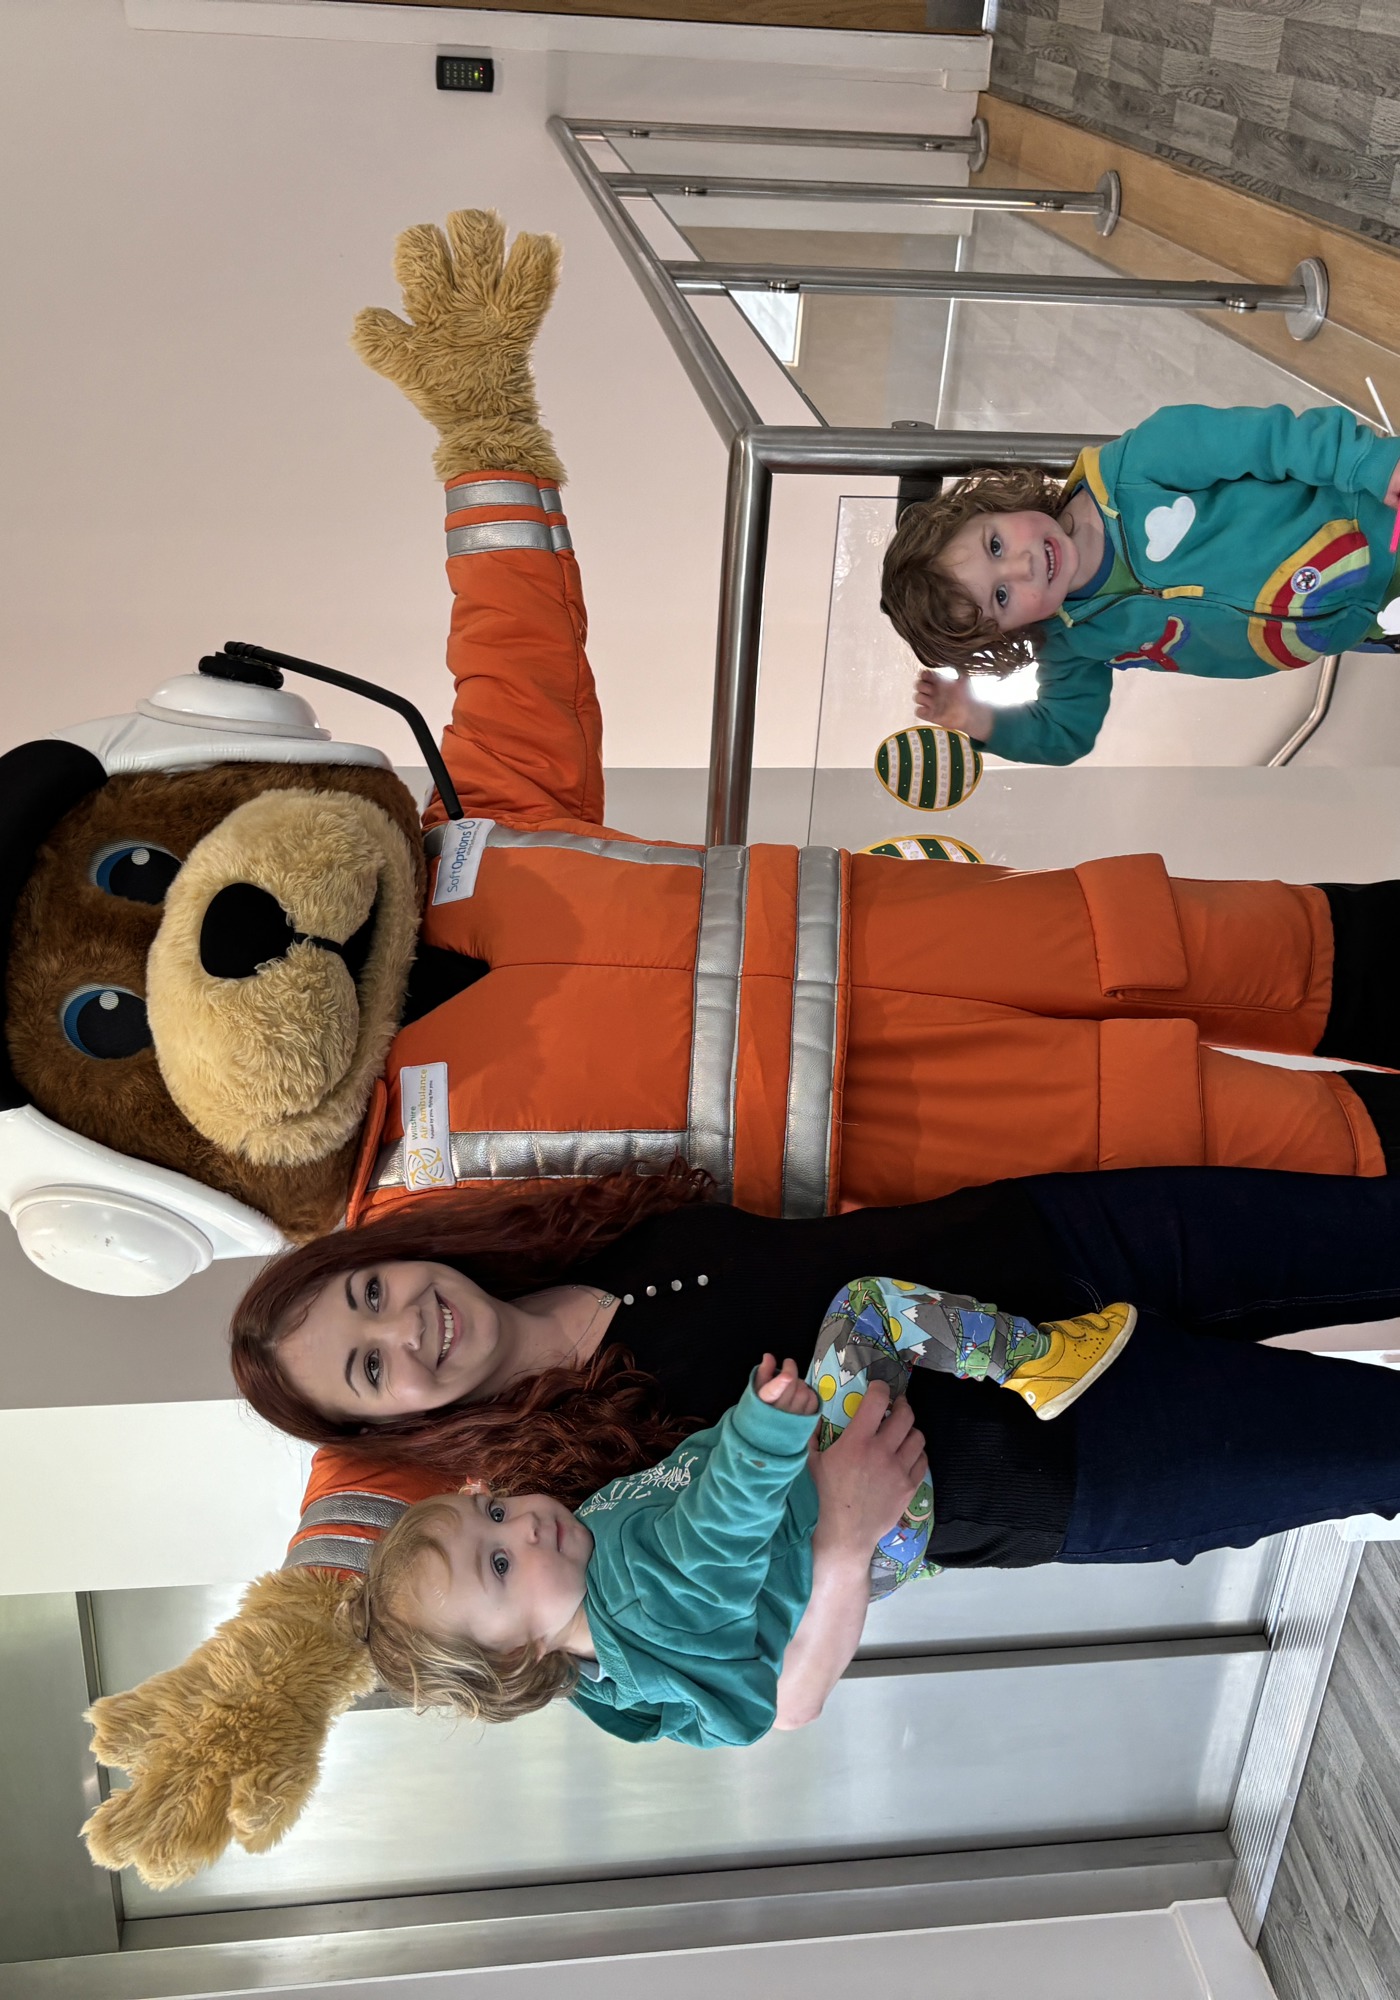 An orange paramedic bear mascot posting with an adult, holding a small child, and another child standing with them